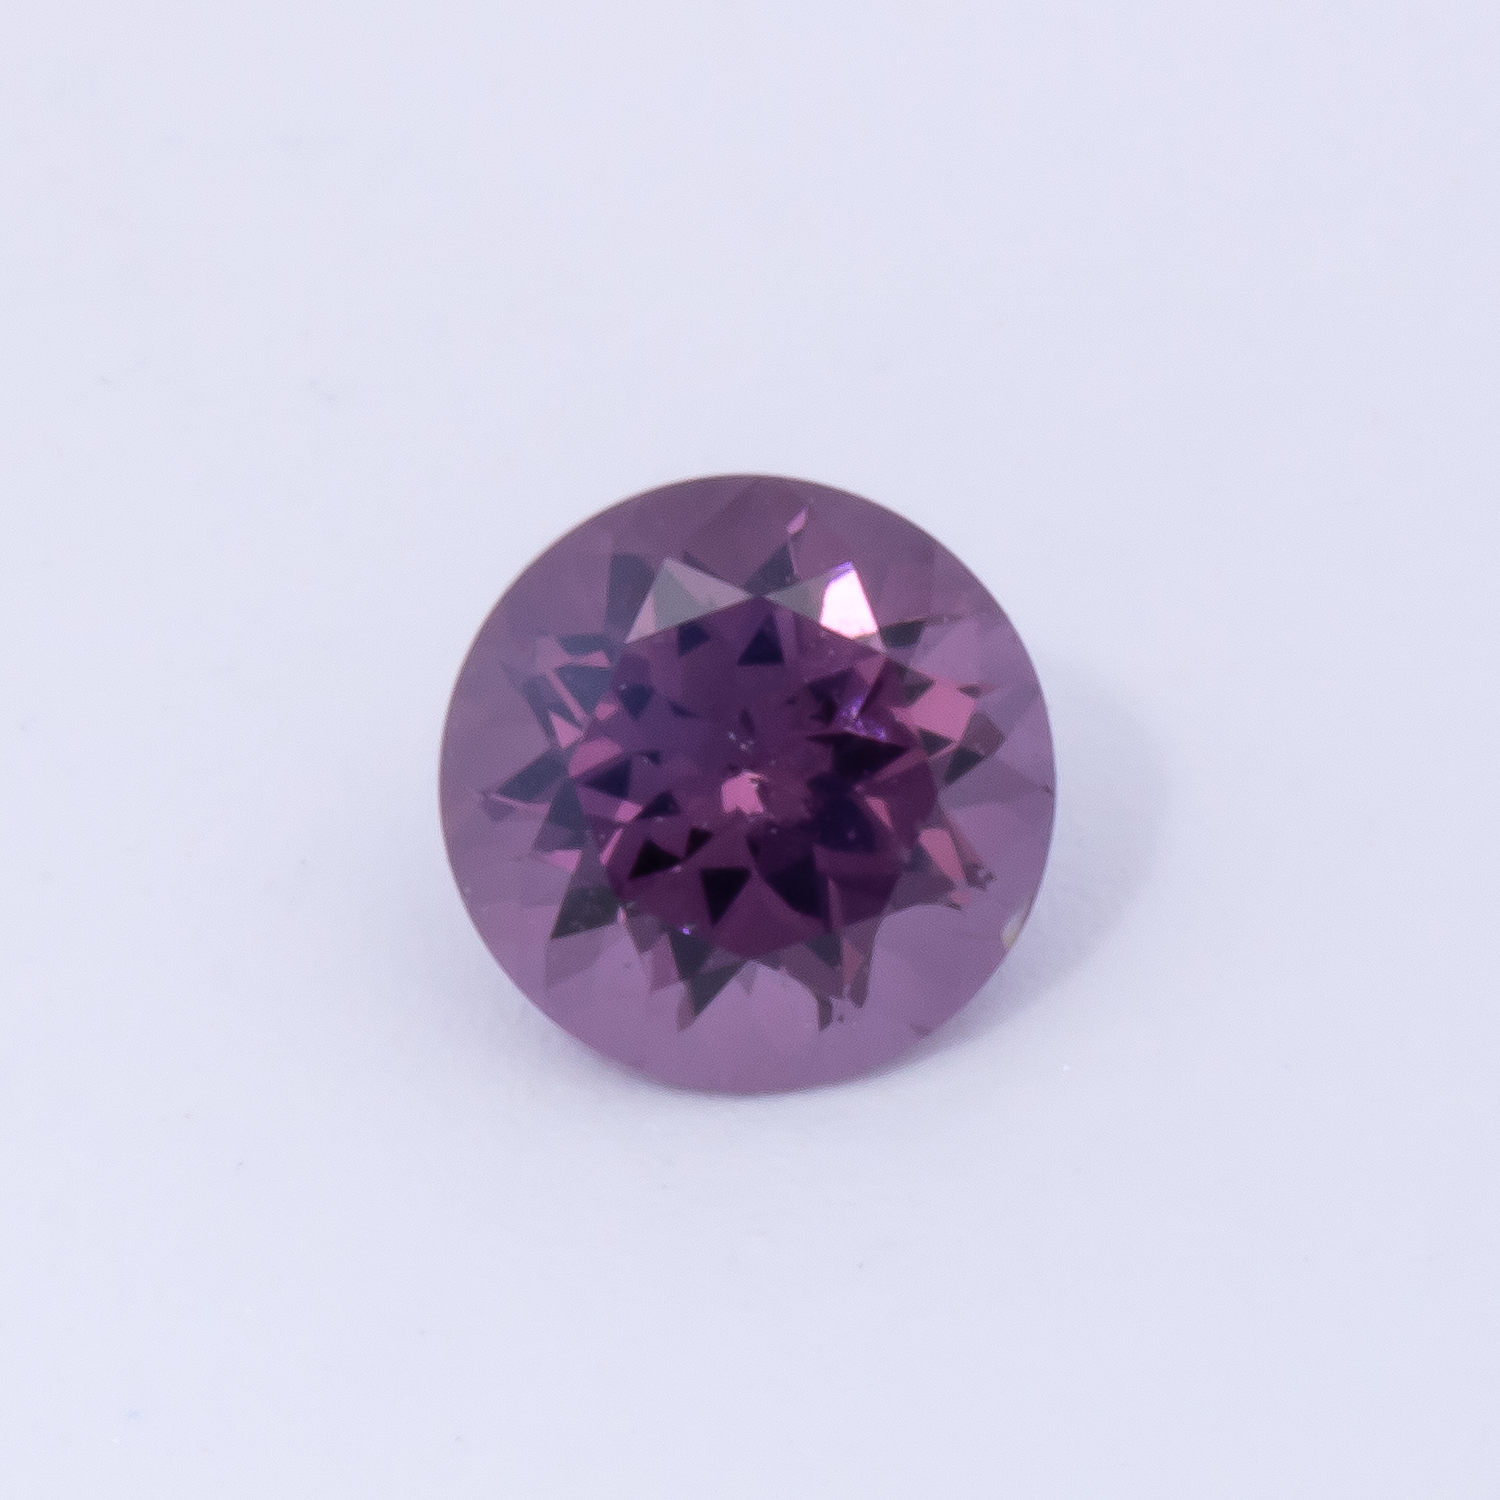 Spinell - lila, rund, 4x4 mm, 0.30 cts, Nr. SP90080